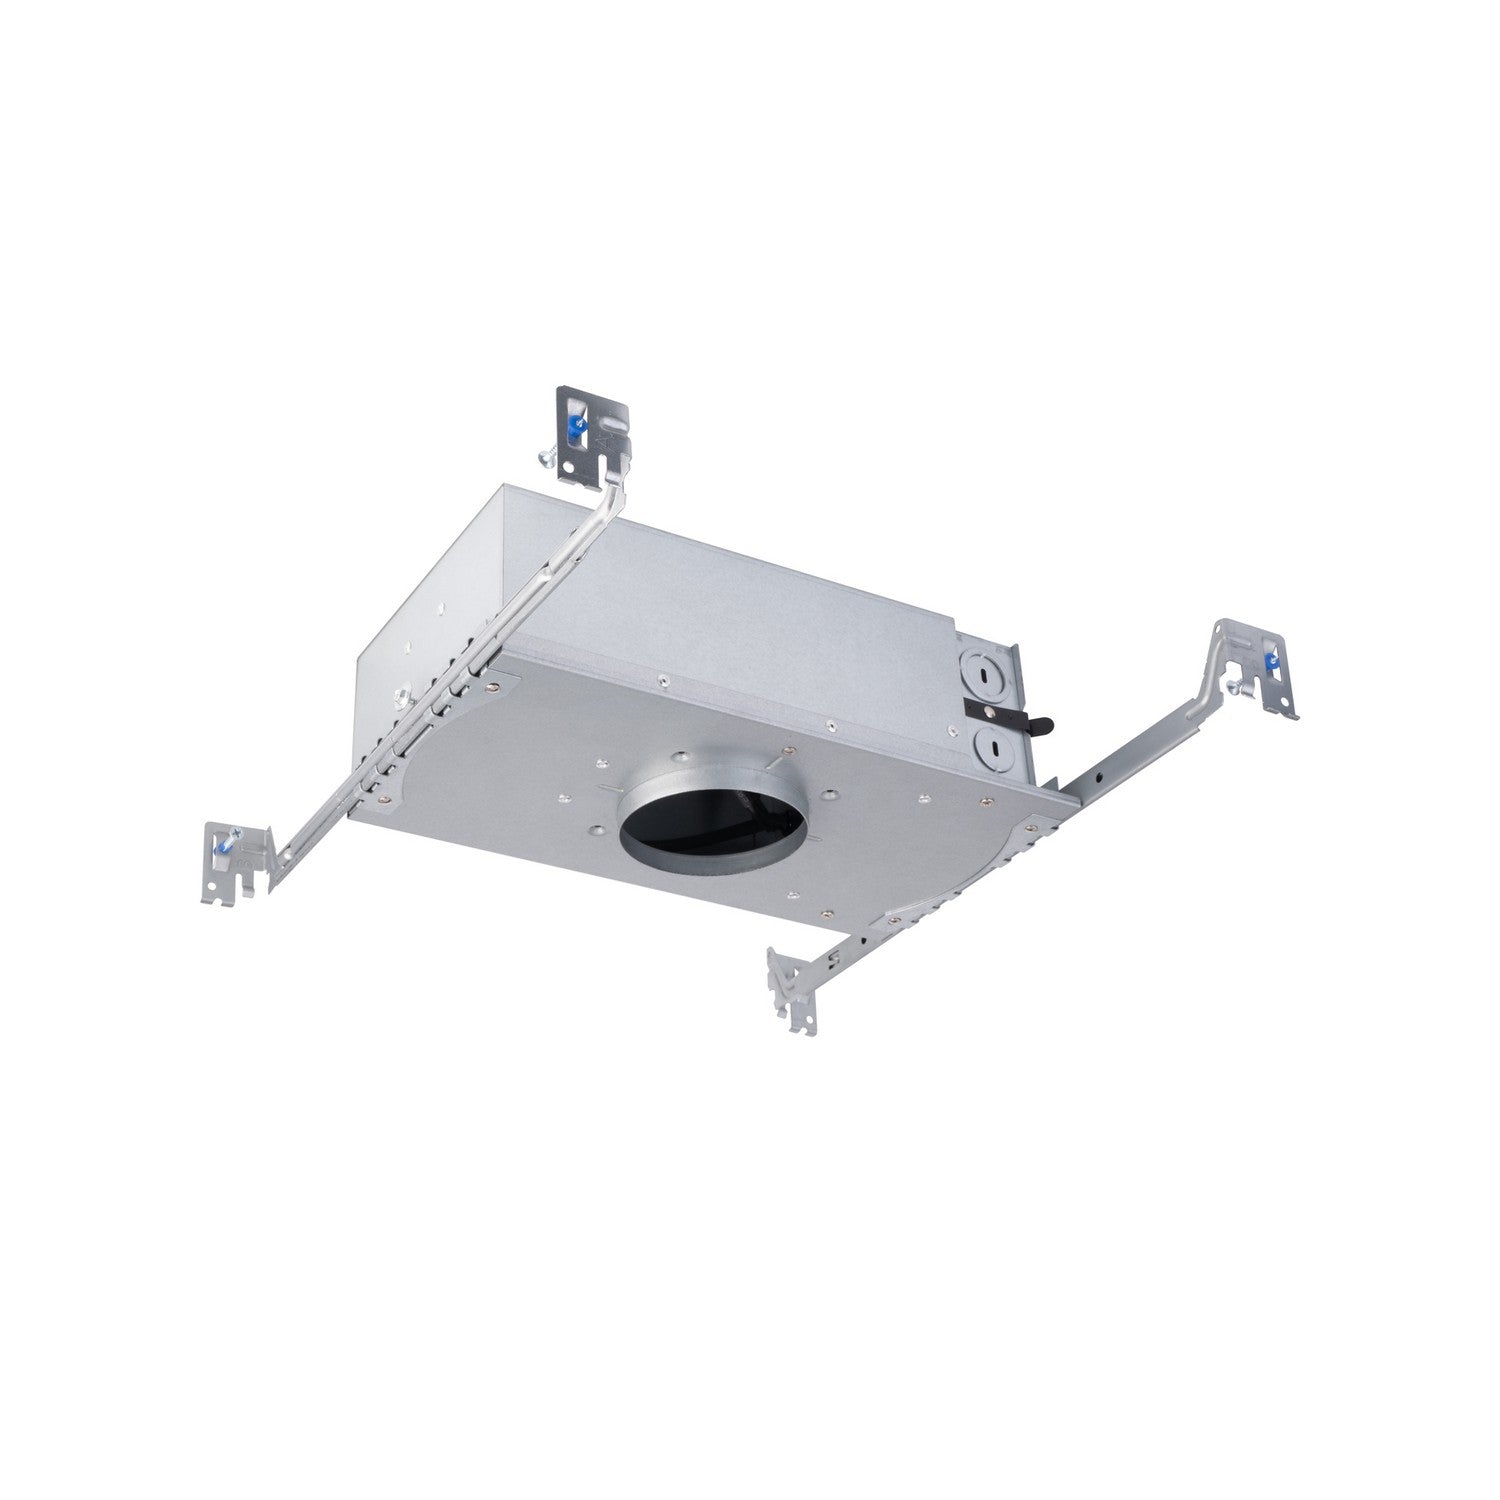 W.A.C. Canada - New Const HSG Round Trimless - 2In Fq Shallow- Union Lighting Luminaires Decor